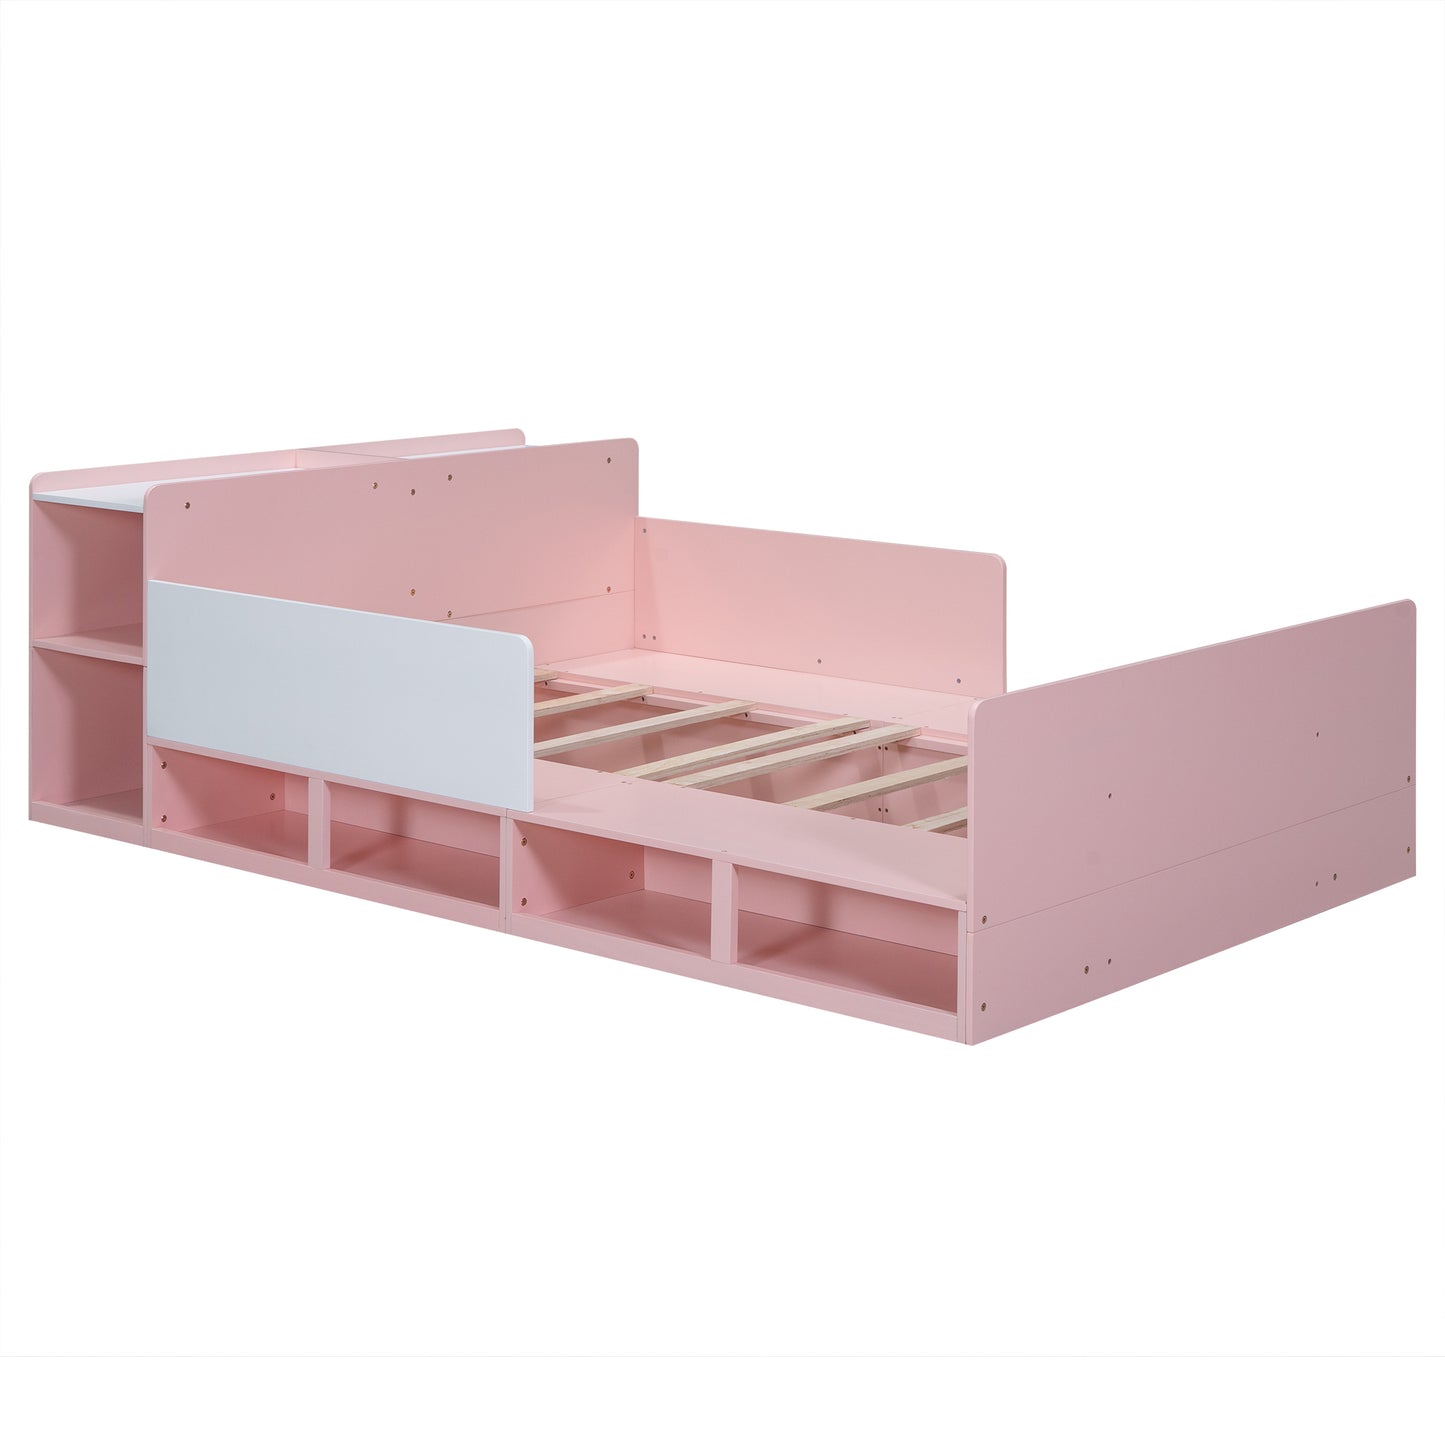 Wood Full Size Platform Bed with Storage Headboard, Guardrails and 4 Underneath Cabinets, Pink